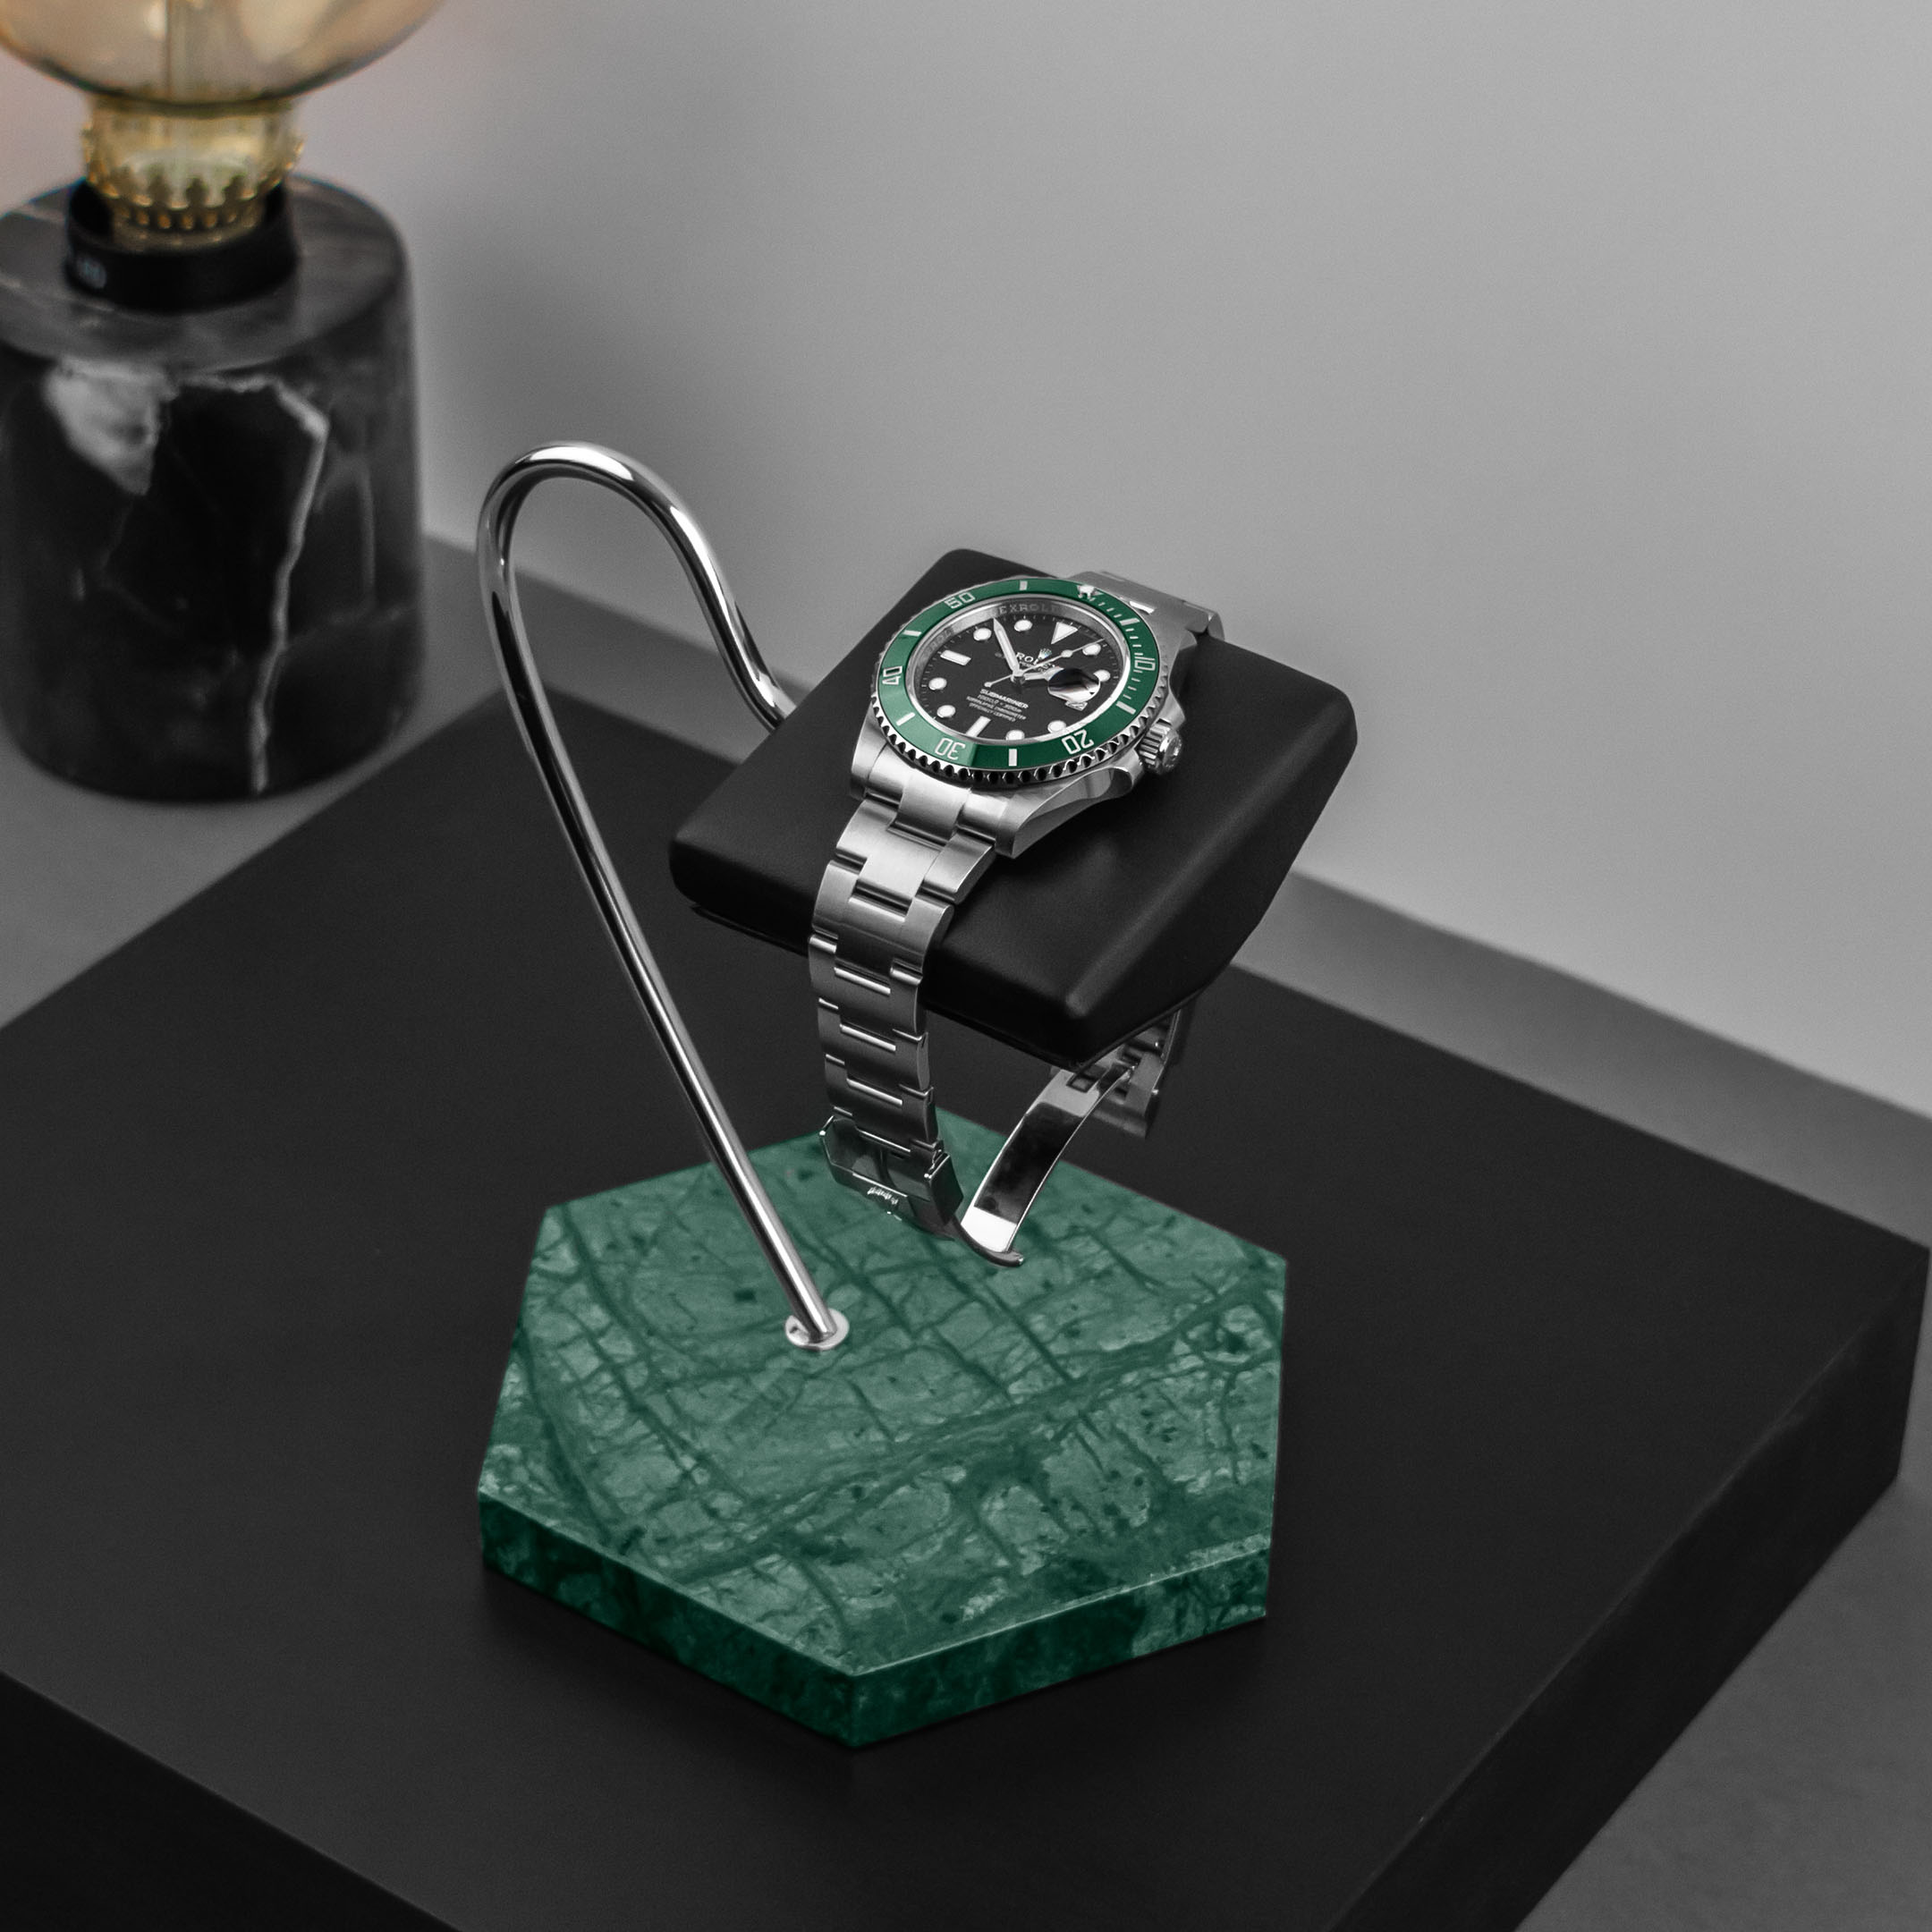 Watch Stand - Green marble